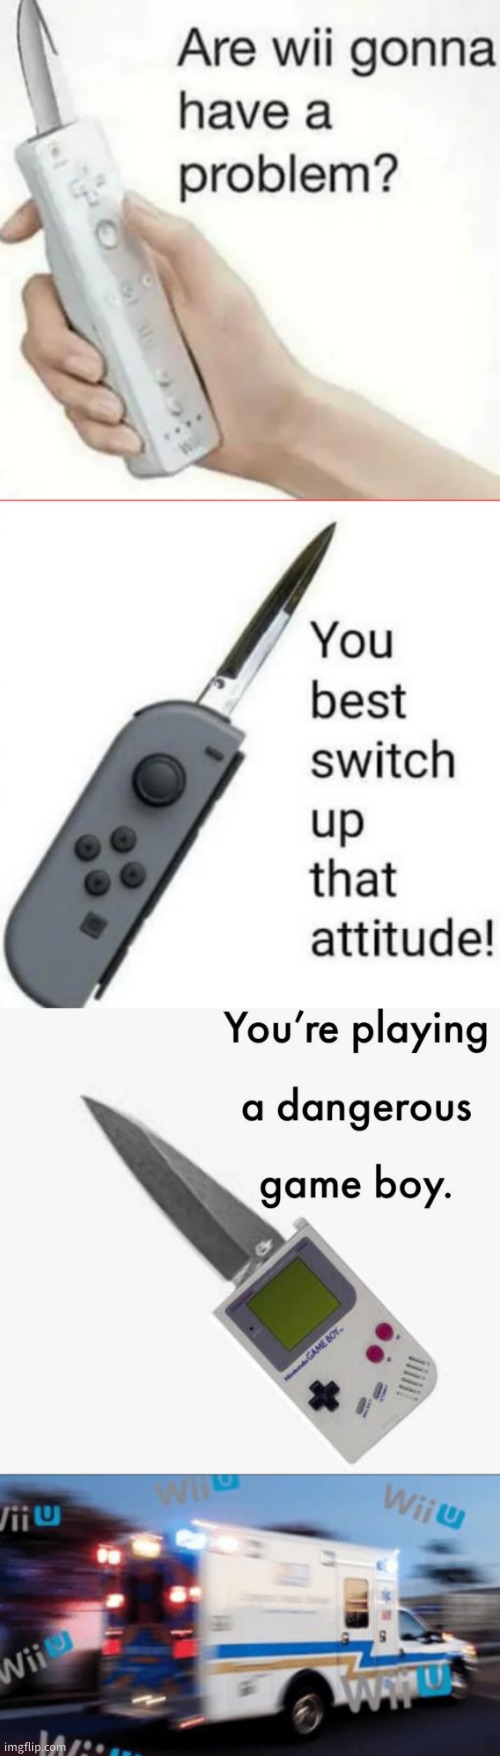 switchblade | image tagged in are wii gonna have a problem,you best switch up that attitude,your playing a dangerous gameboy,wii u ambulance | made w/ Imgflip meme maker